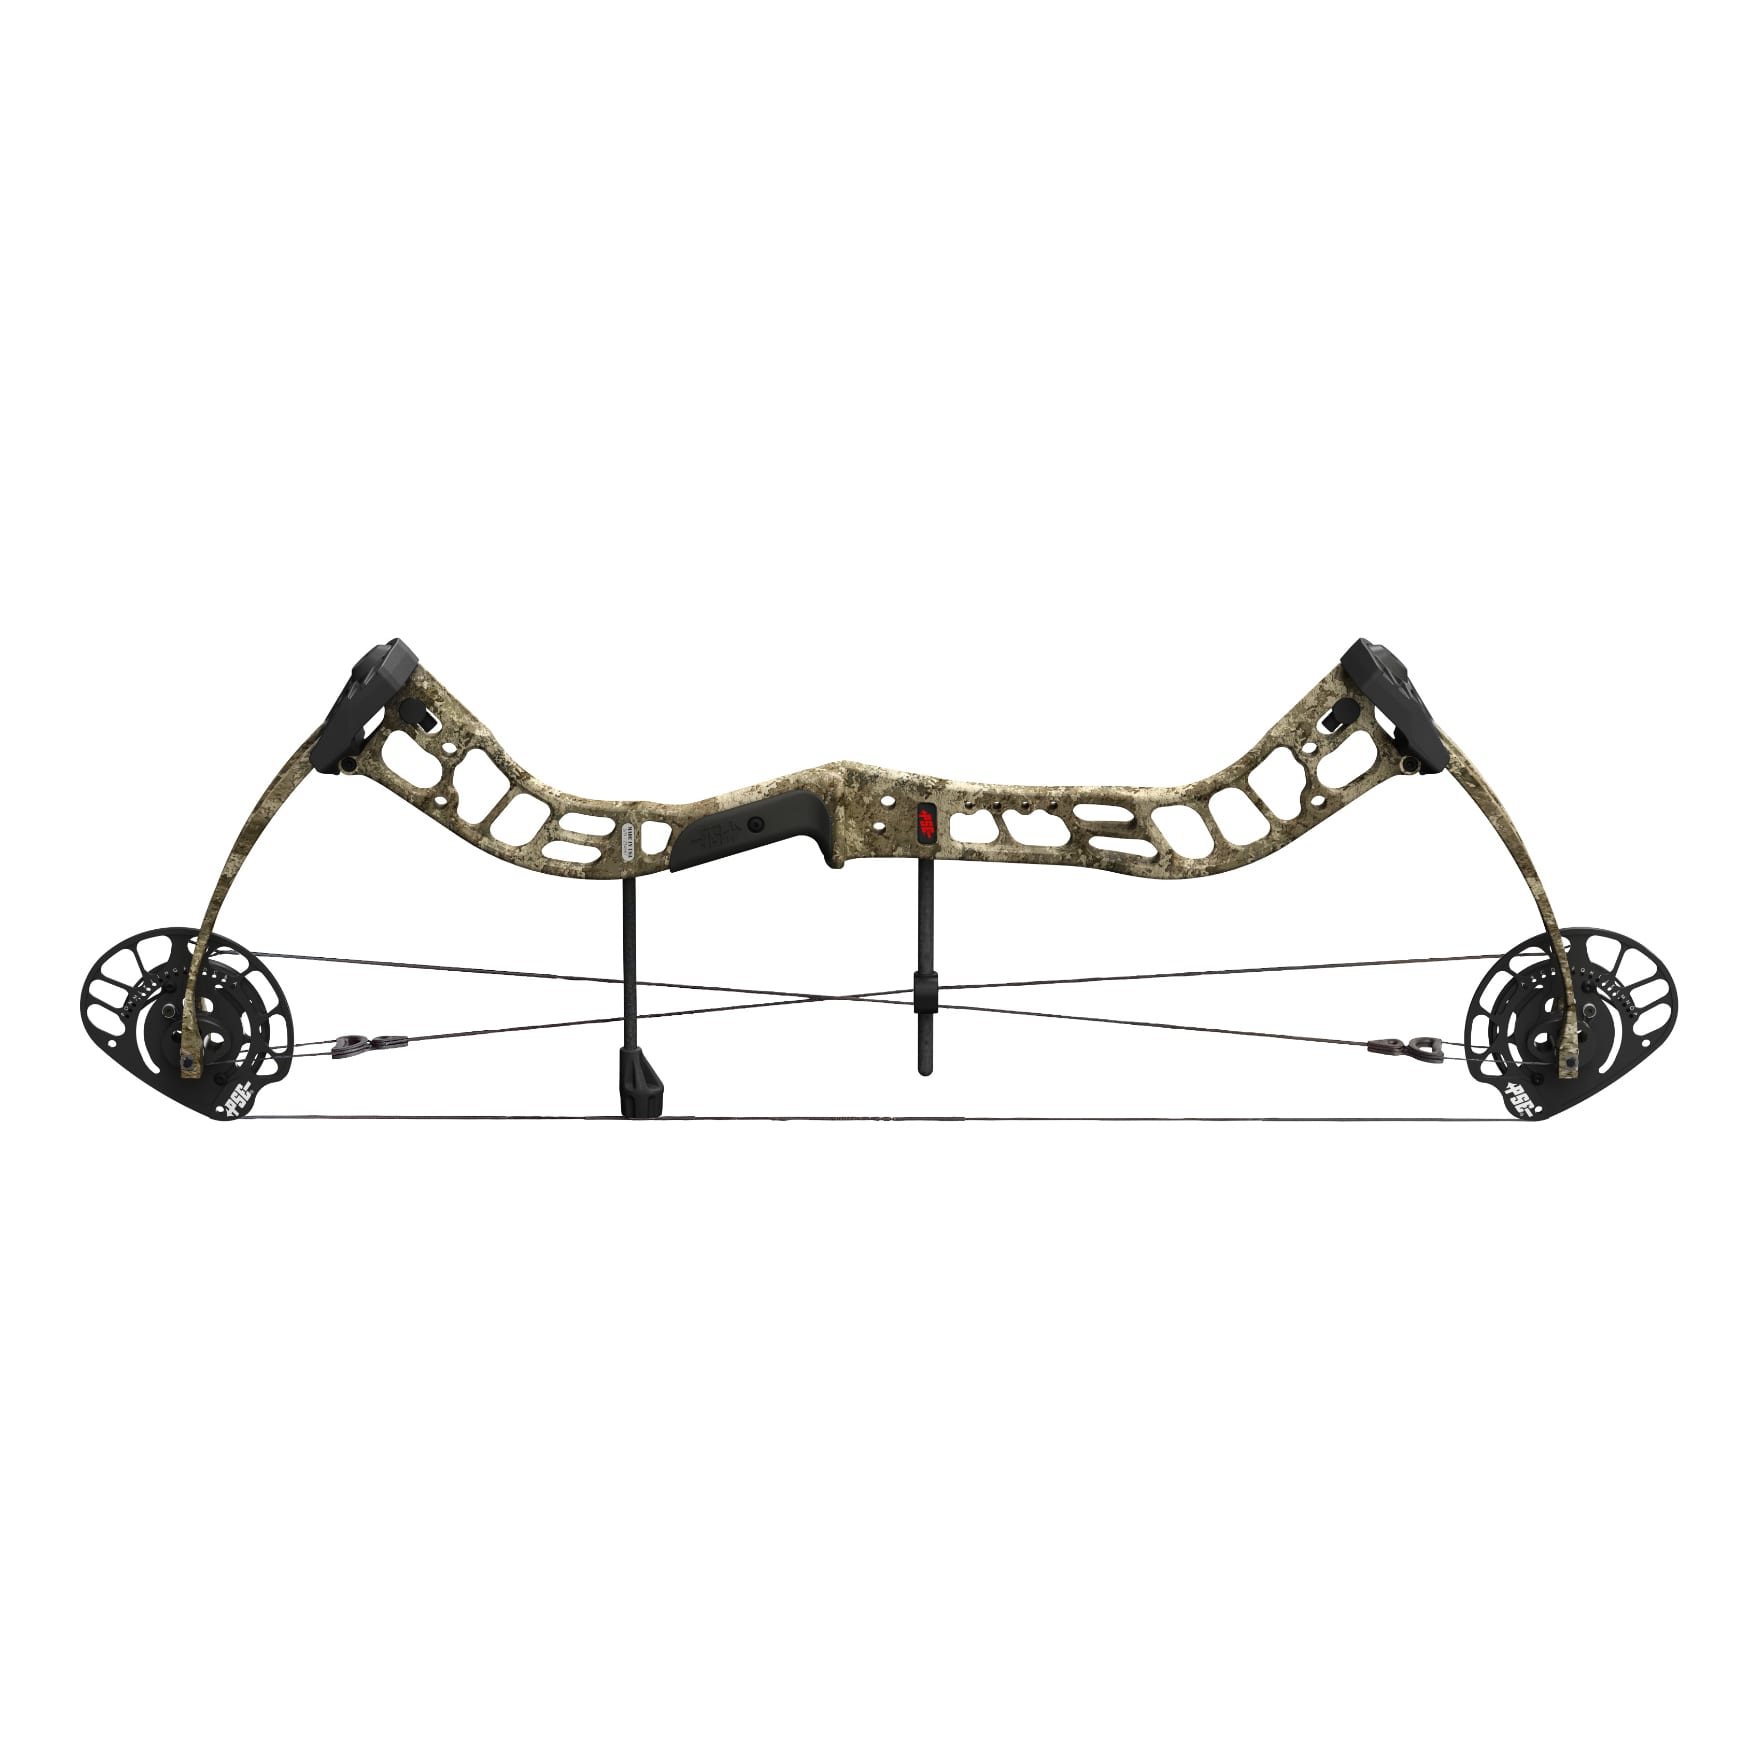 PSE® Archery Brute™ ATK RTH Compound Bow Package